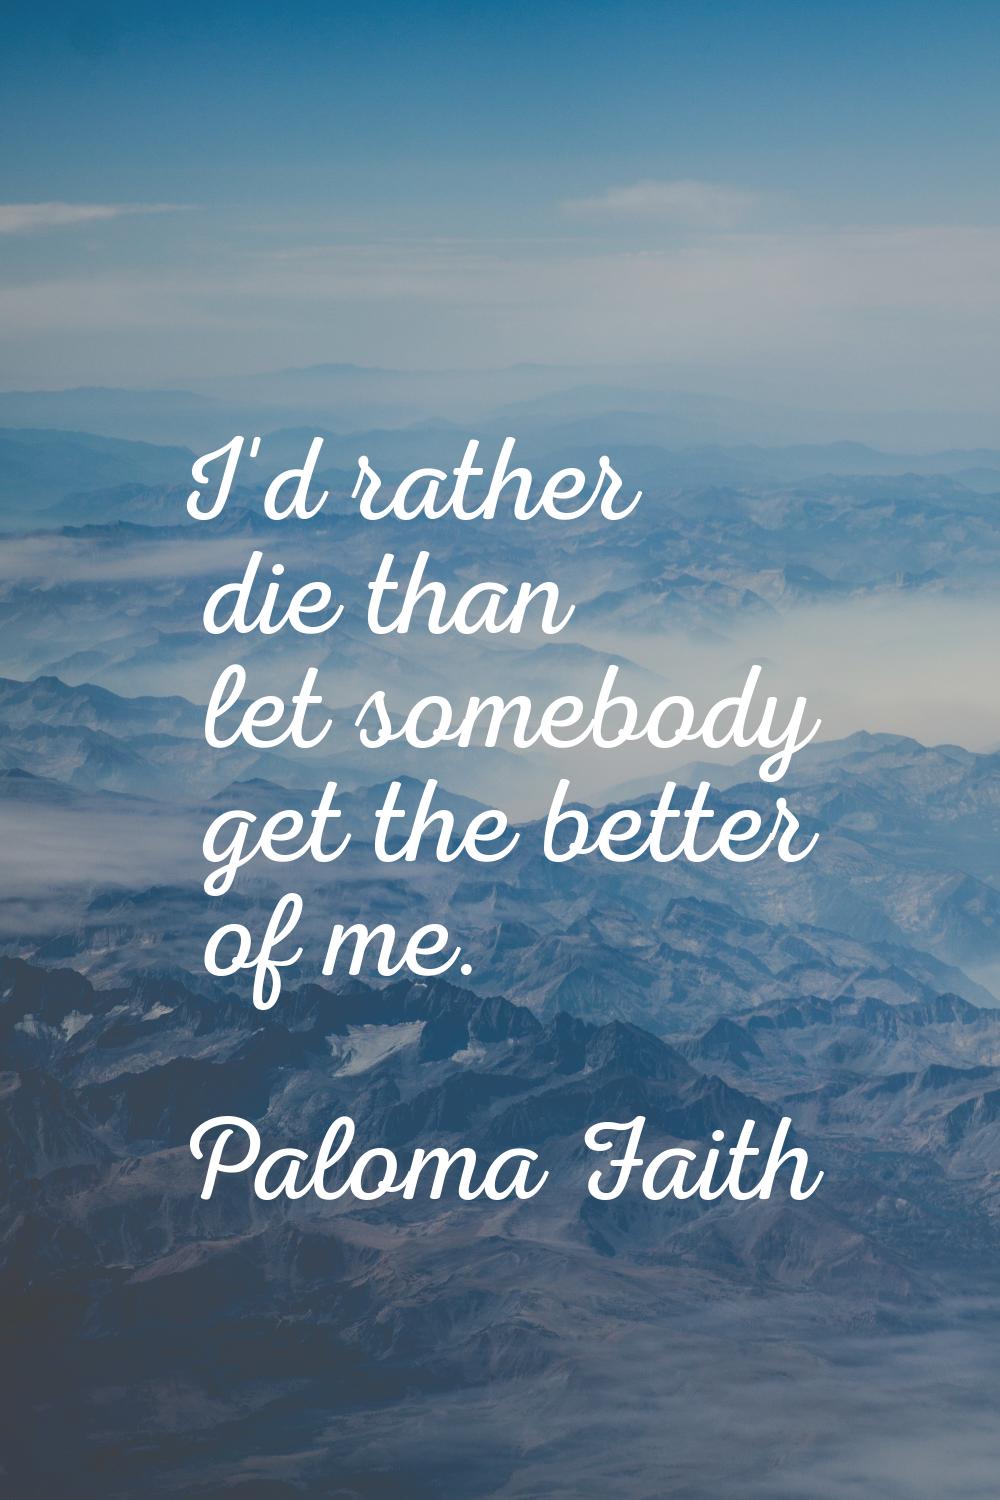 I'd rather die than let somebody get the better of me.